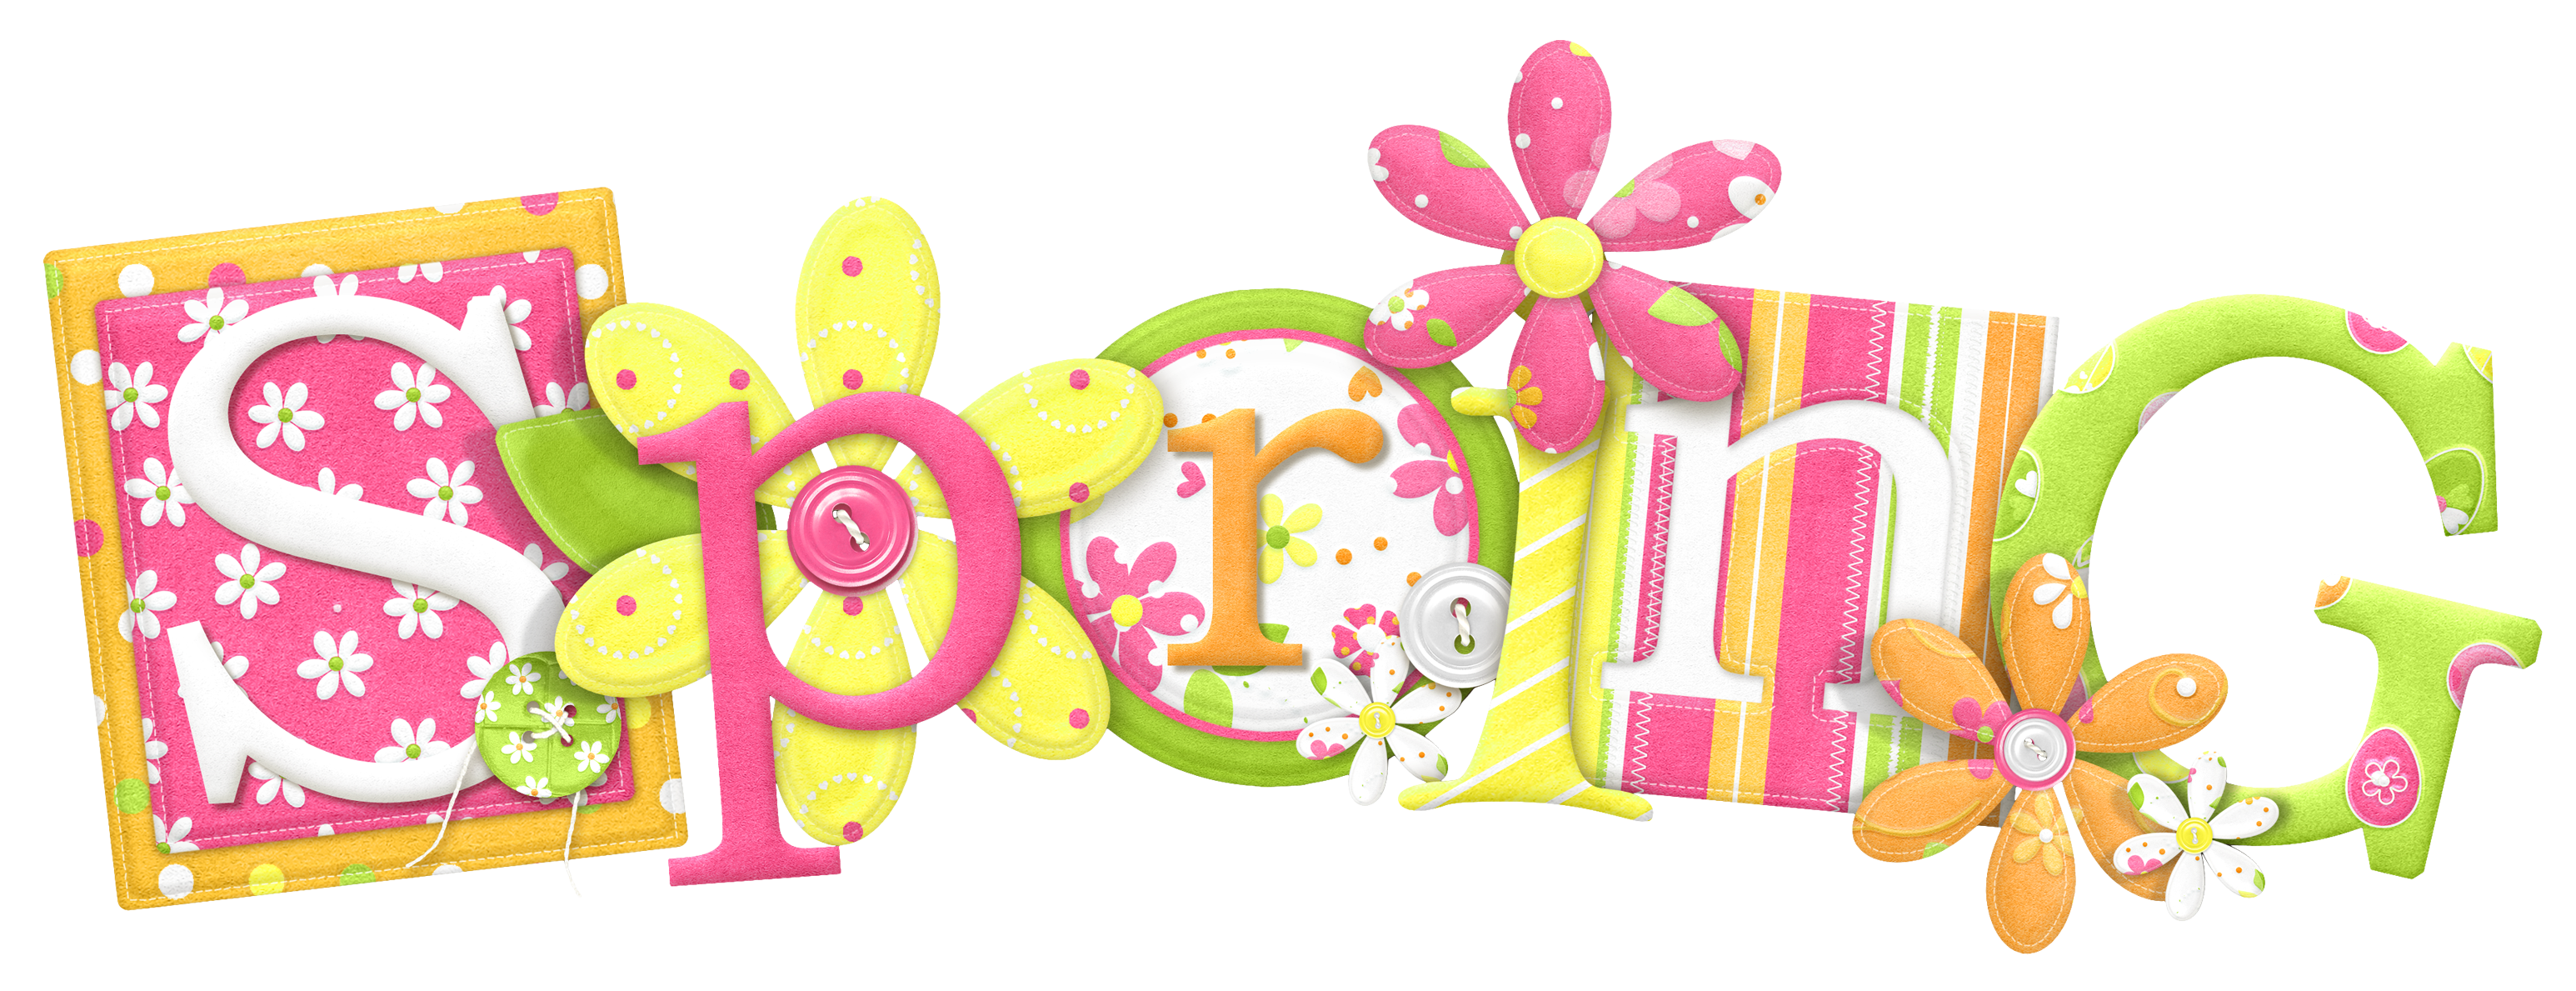 free spring clipart banners - photo #29